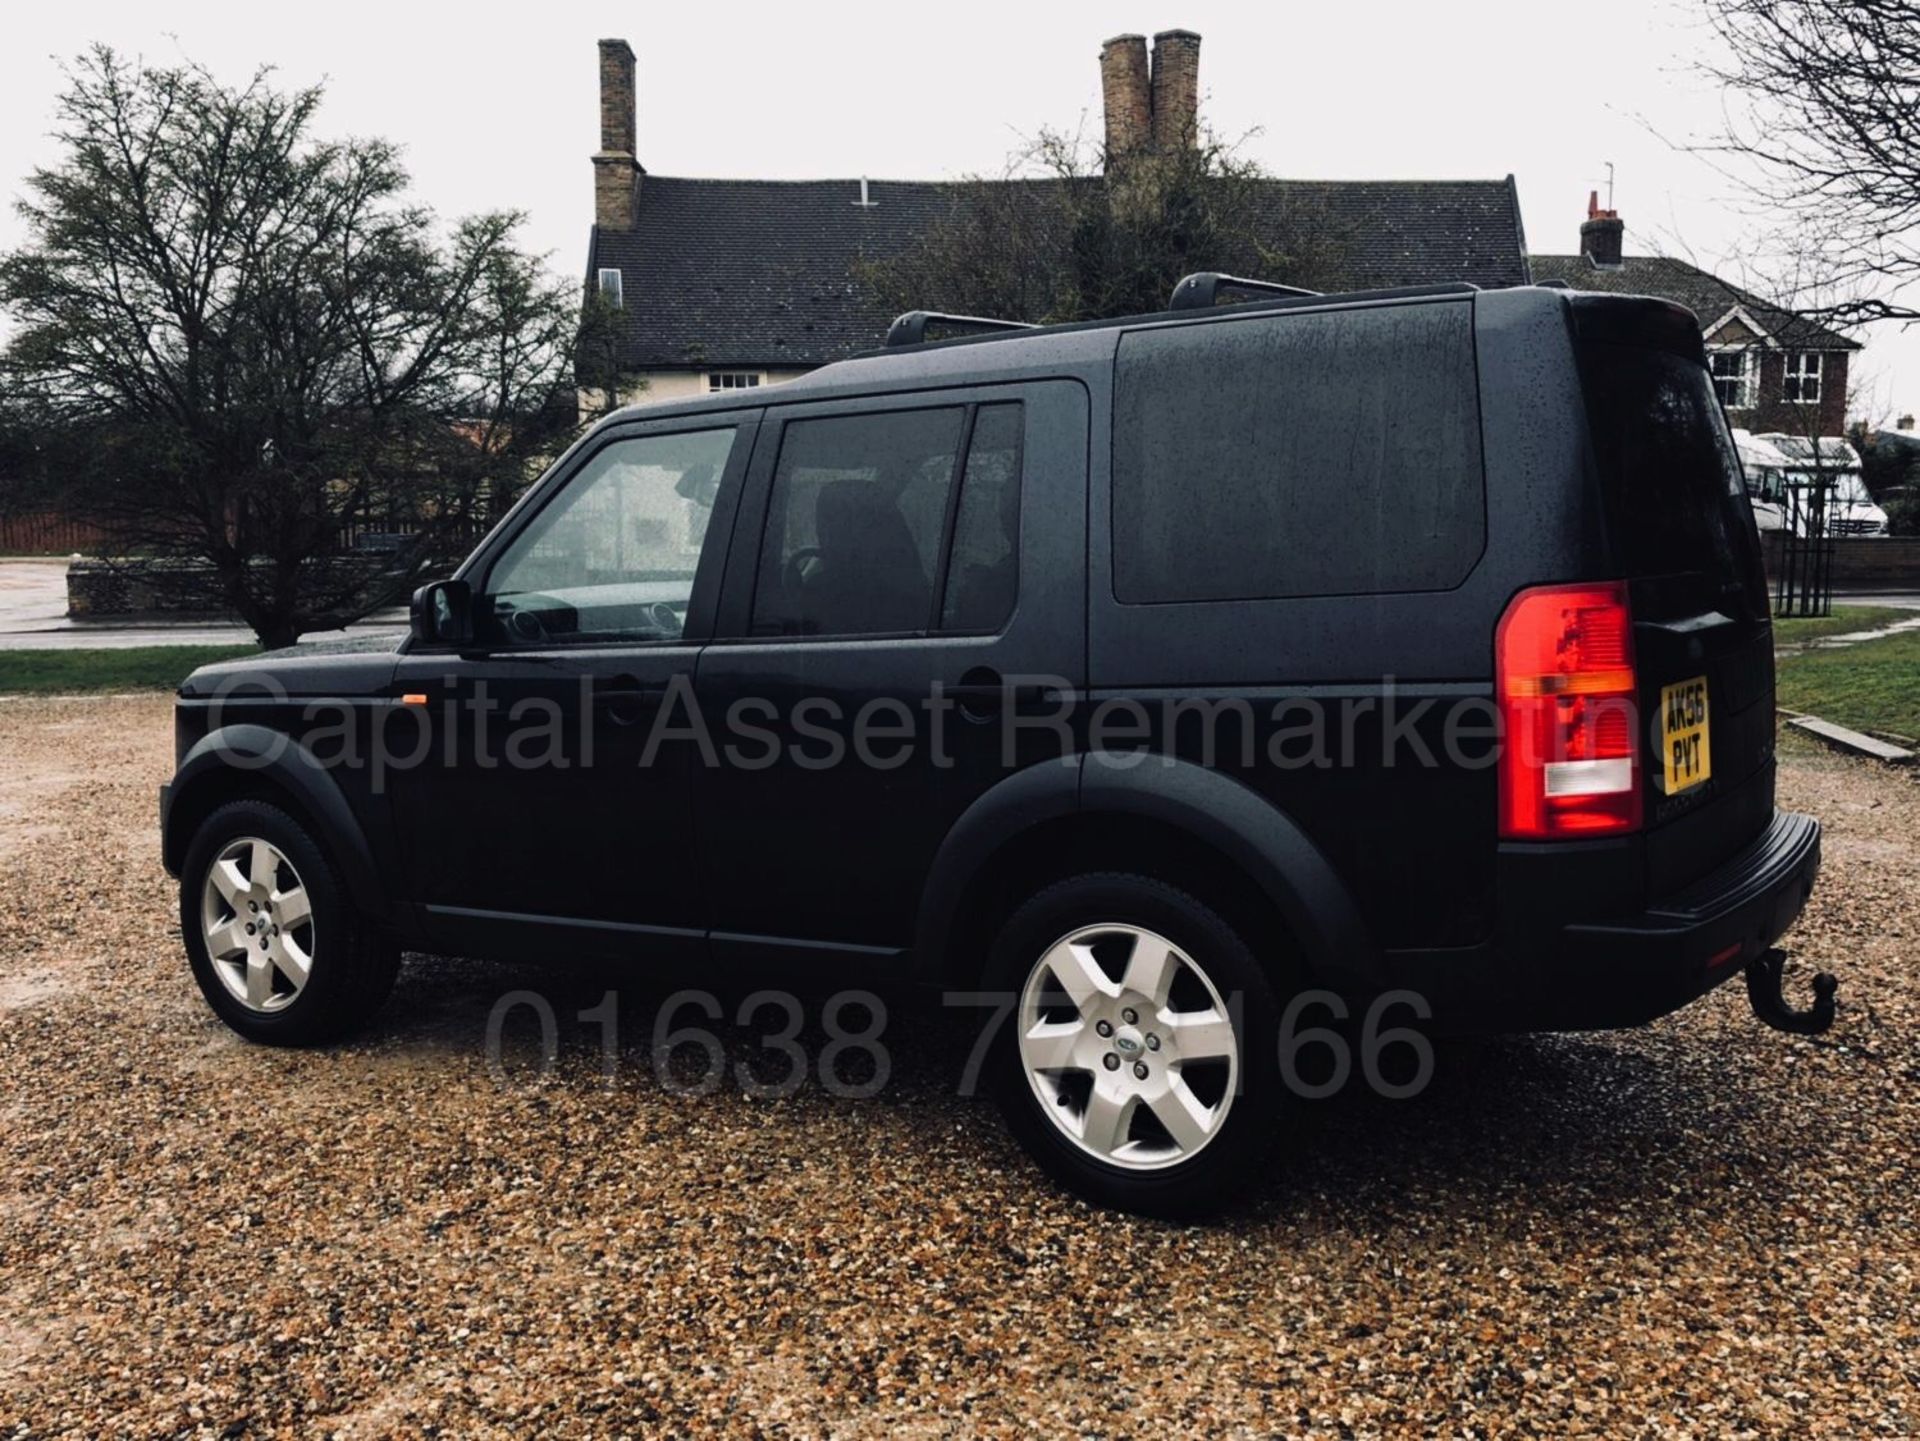 (On Sale) LAND ROVER DISCOVERY 3 'HSE' (2007 MODEL) 'TDV6 - AUTO - LEATHER - SAT NAV' *HUGE SPEC* - Image 8 of 51